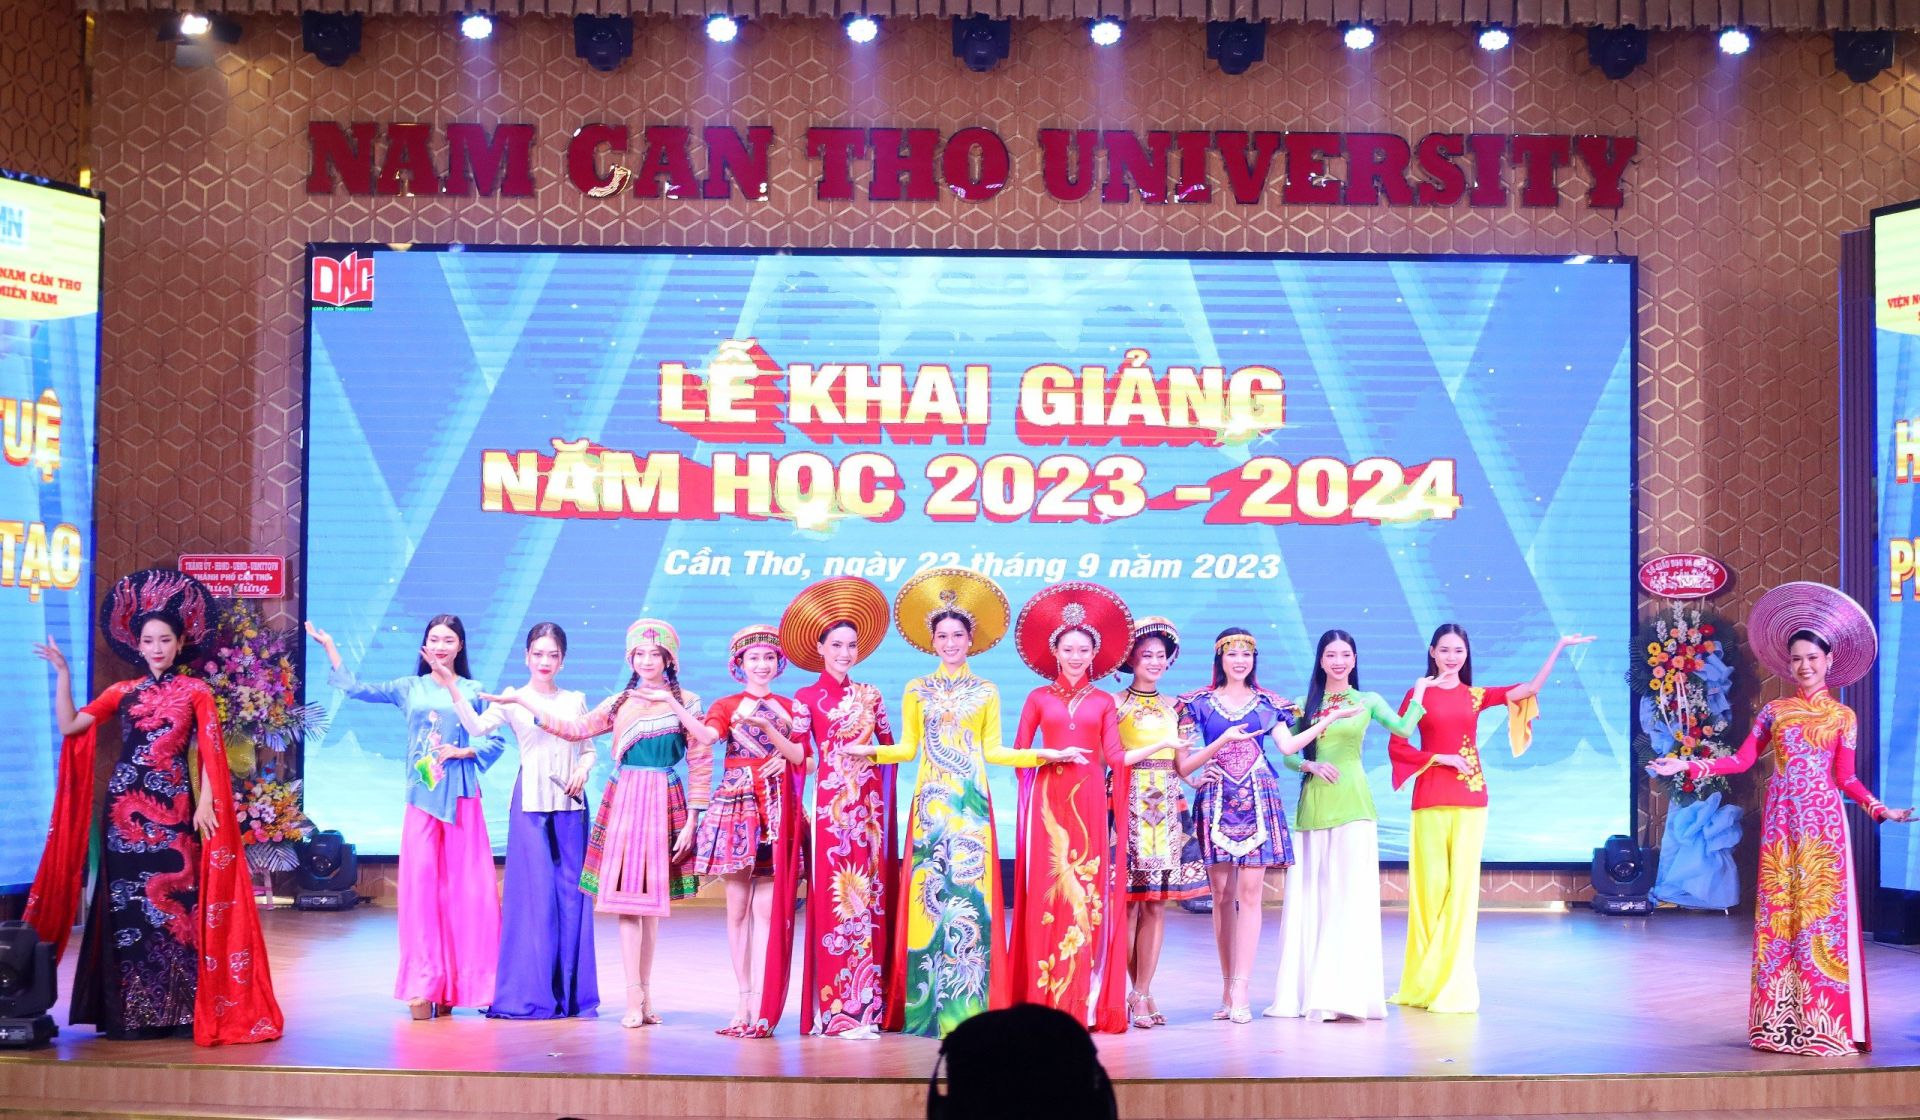 Artistic performance to usher in the new academic year 2023 - 2024